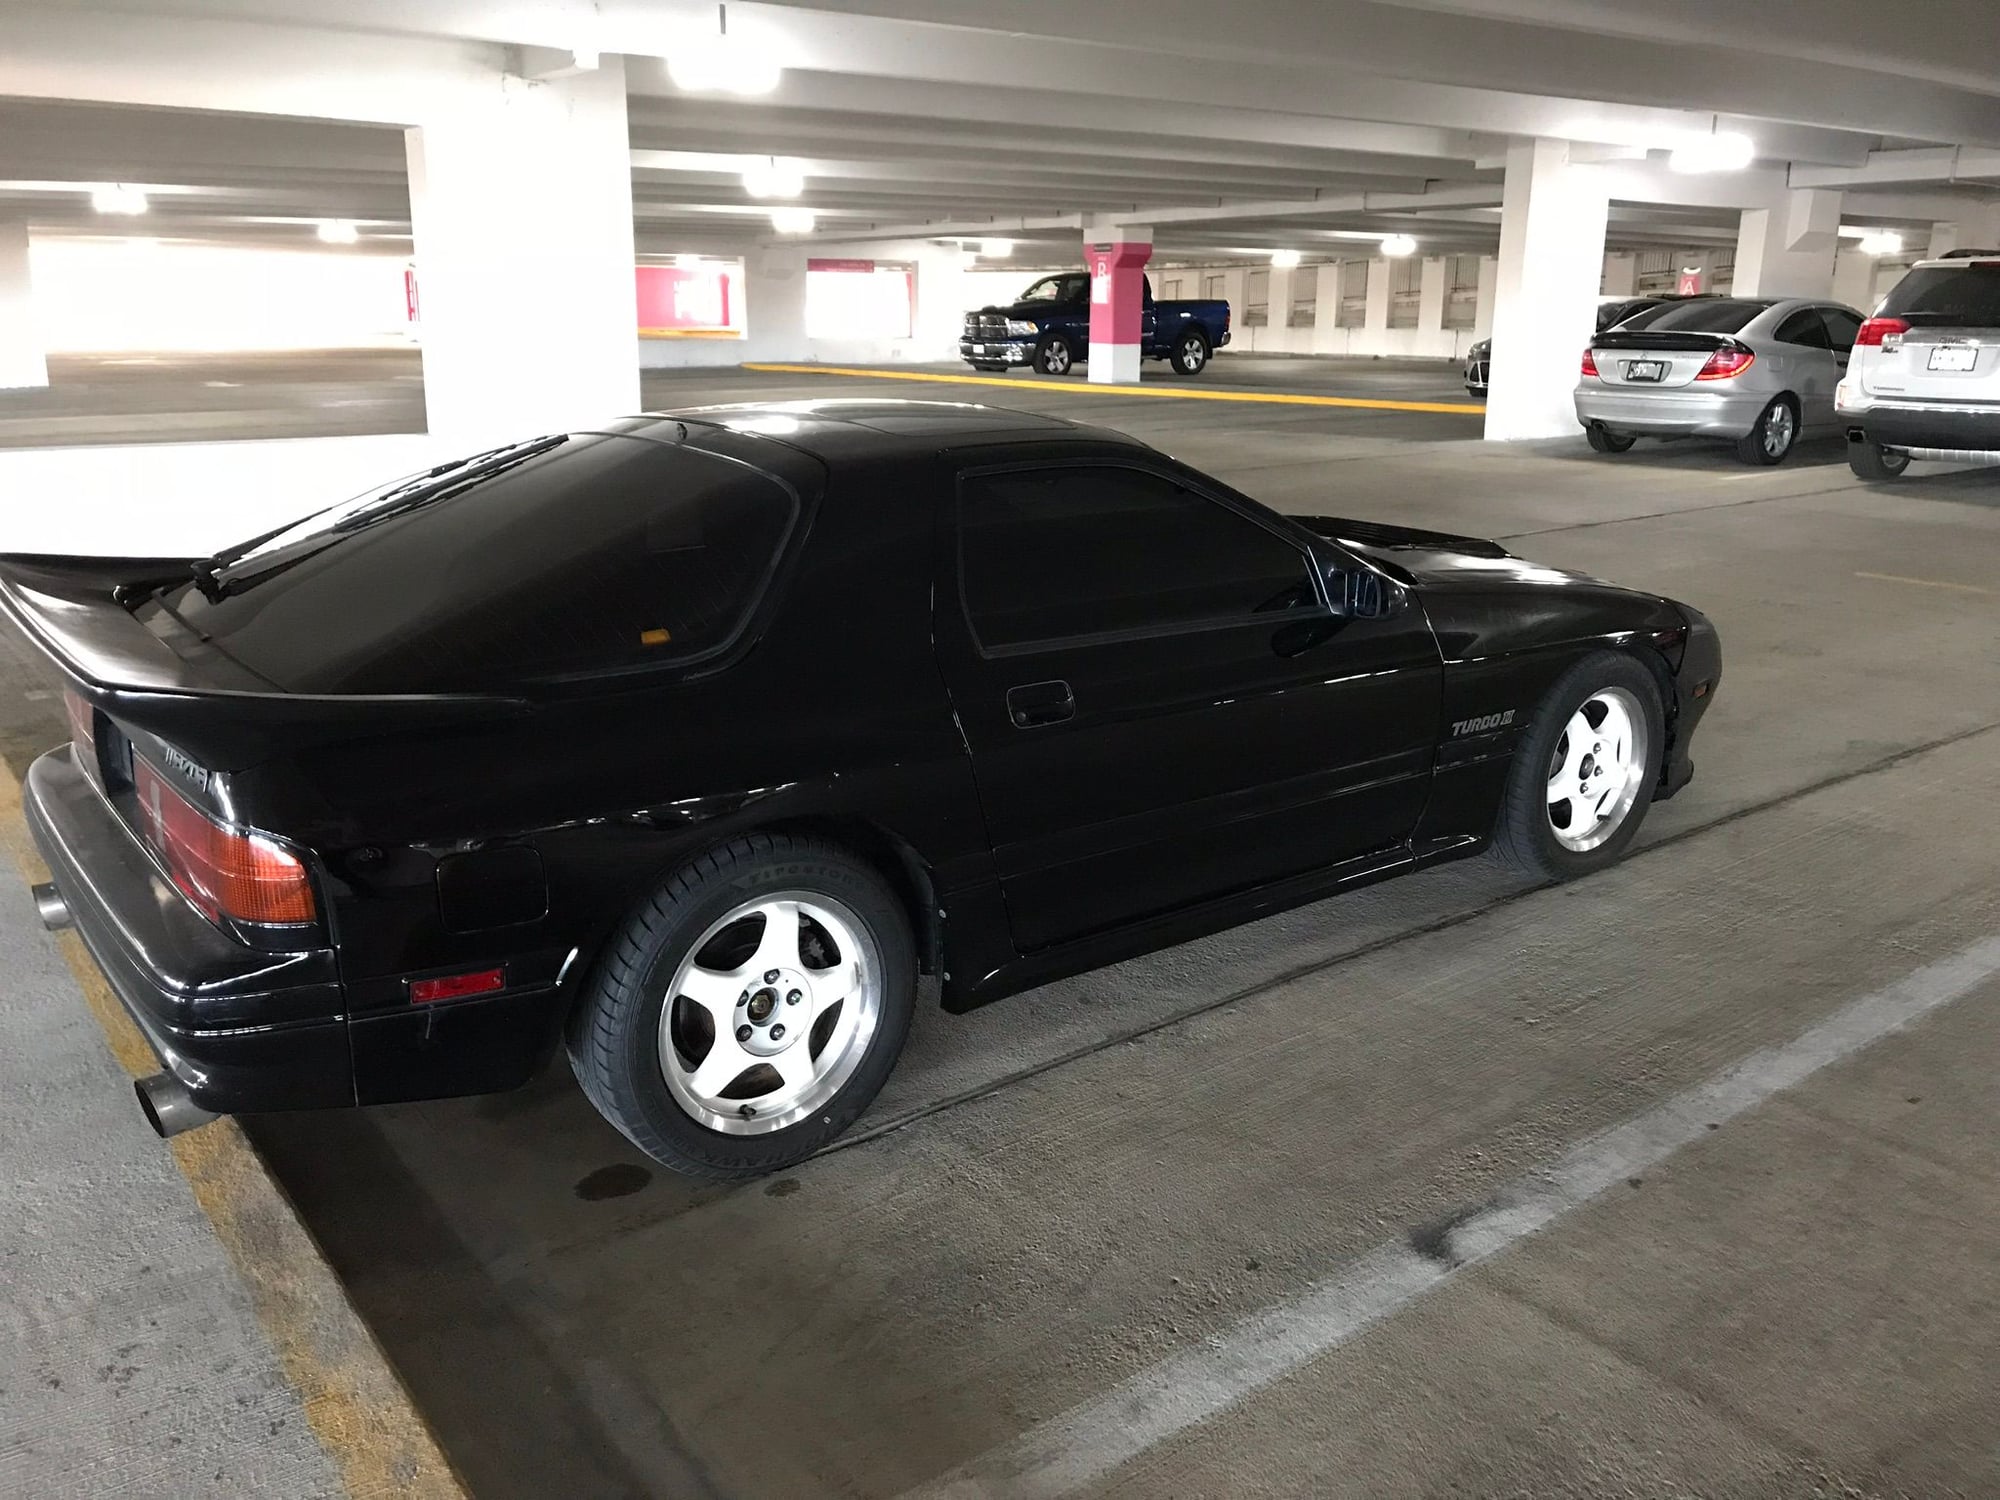 Wheels and Tires/Axles - Turbo 2 size jdm wheels - Used - 1986 to 2000 Mazda RX-7 - St Louis, MO 63114, United States